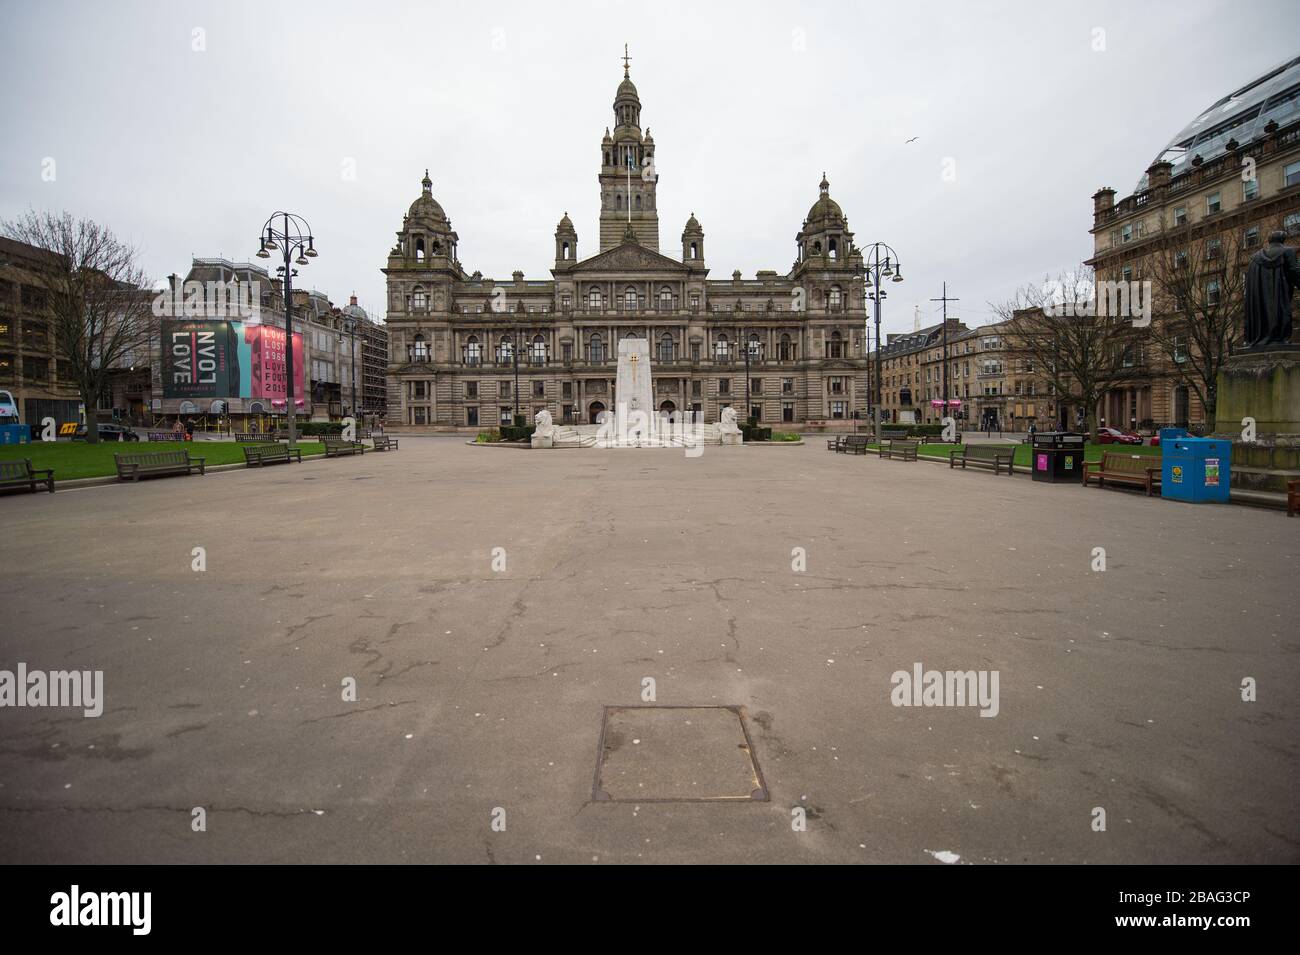 Glasgow, UK. 27th Mar, 2020. Pictured: George Square in the centre of Glasgow showing the City Chambers is now completely empty. Views of Glasgow City Centre showing empty streets, shops closed and empty railway stations during what would normally be a busy street scene with shoppers and people working within the city. The Coronavirus Pandemic has forced the UK Government to order a shut down of all the UK major cities and make people stay at home. Credit: Colin Fisher/Alamy Live News Stock Photo